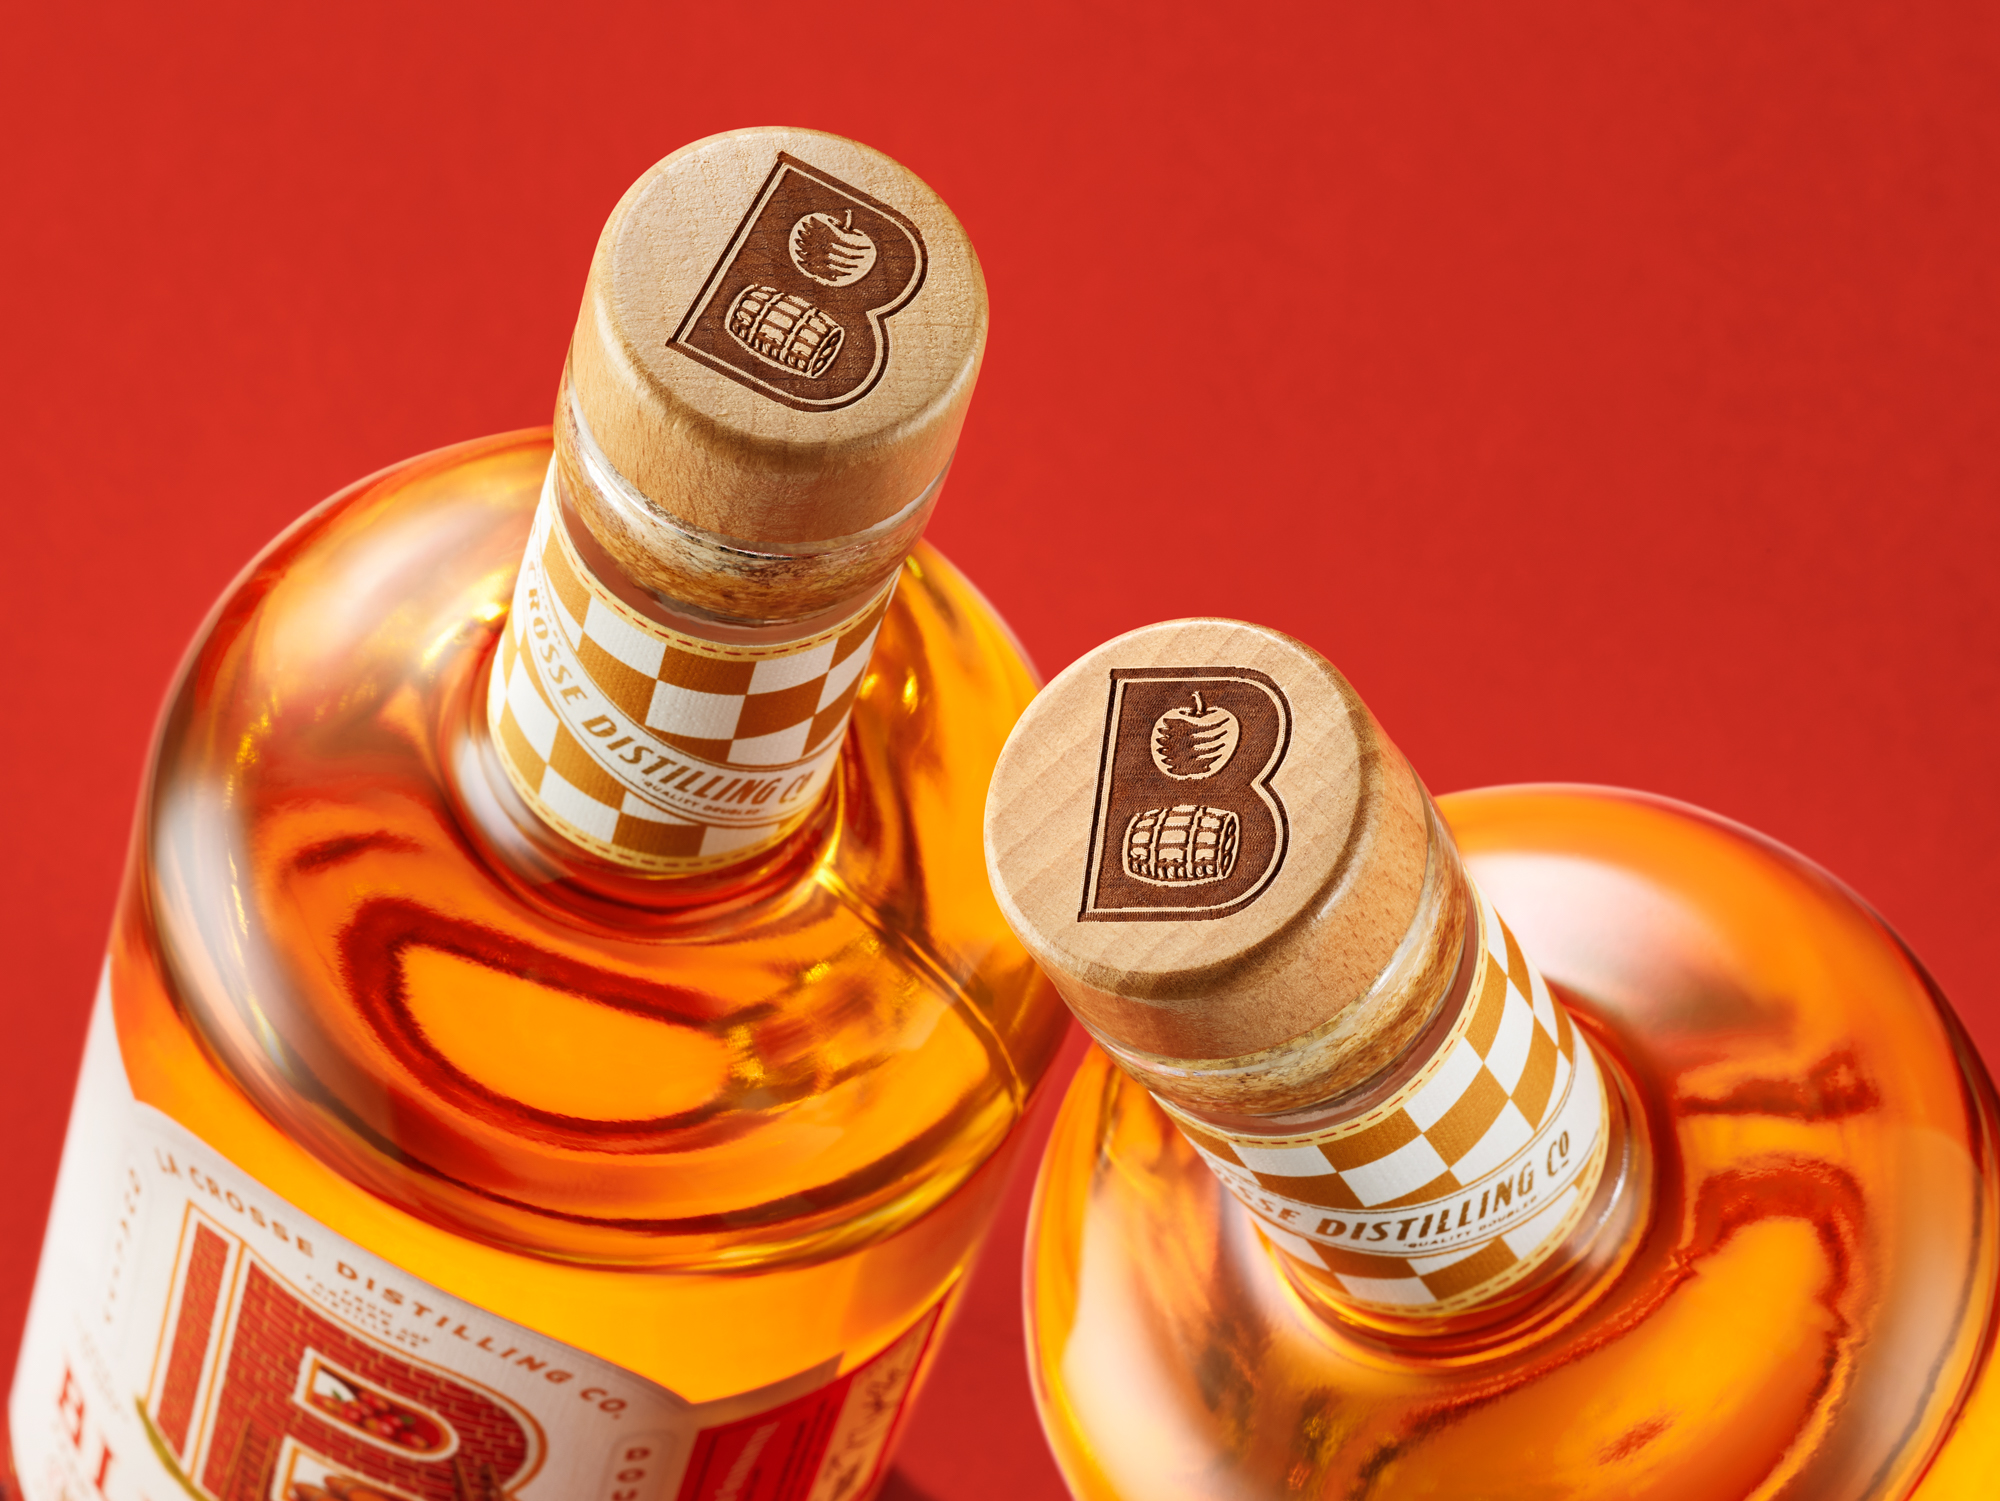 Bluffside Brandy brand and package design